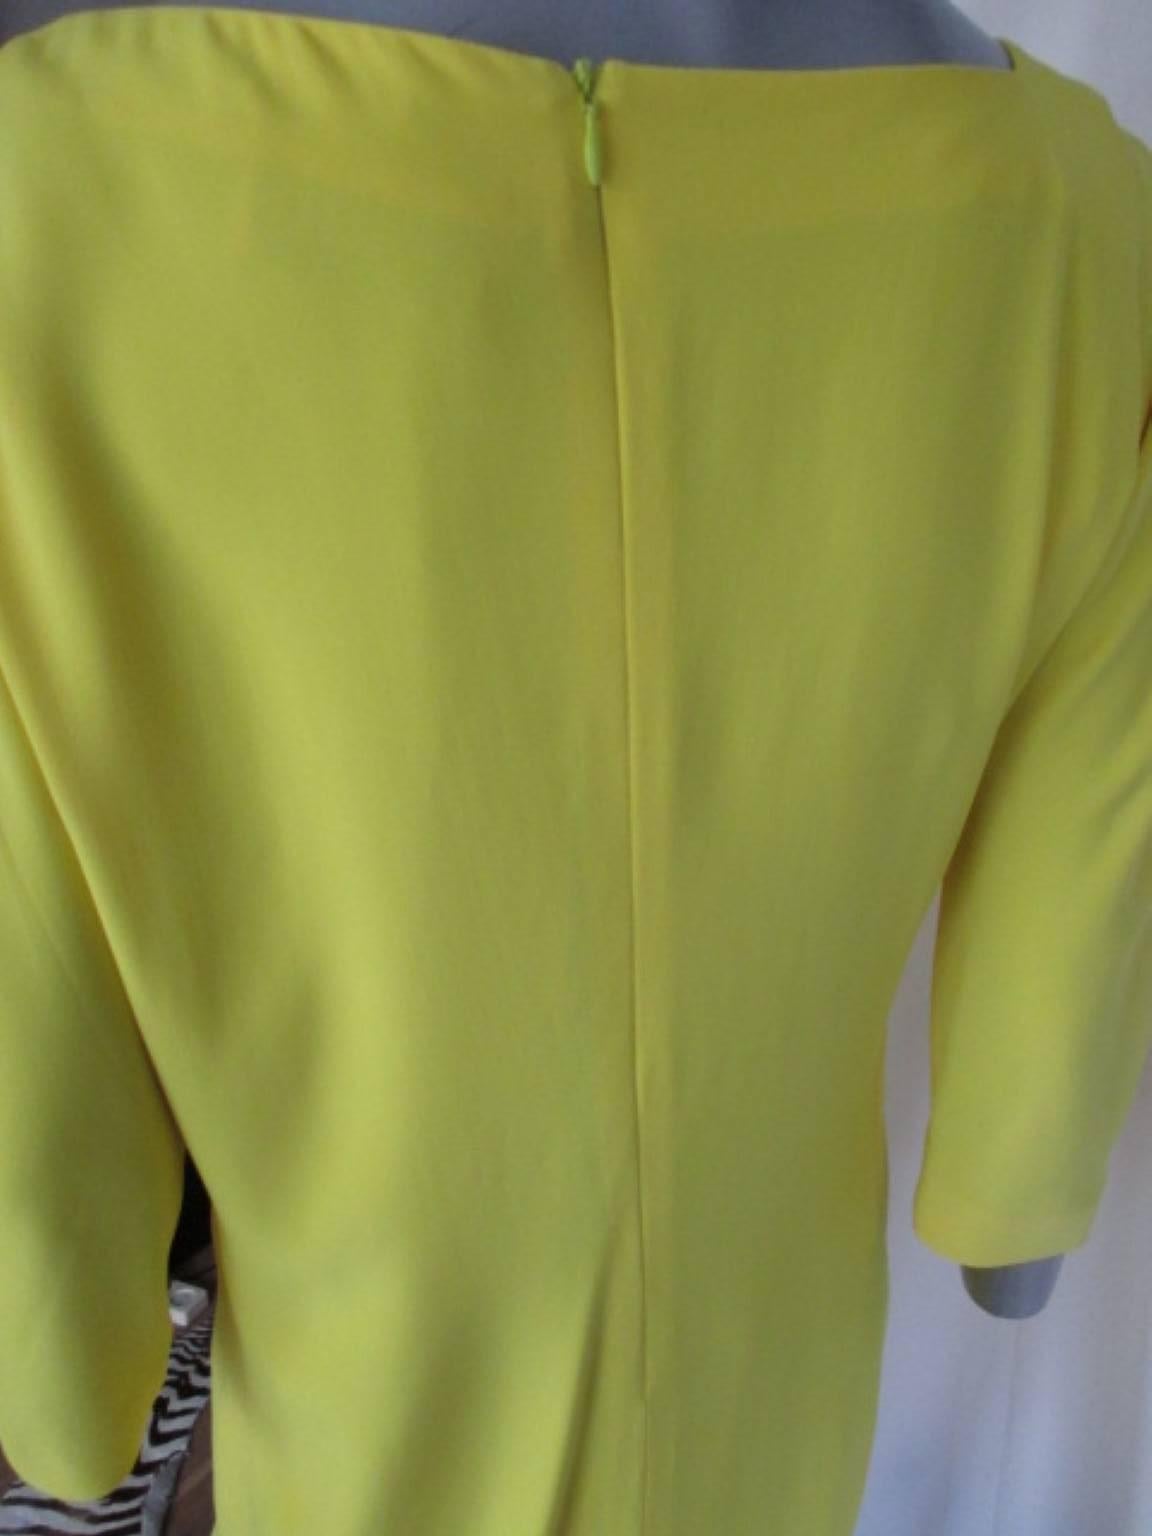 Yellow Gianfranco Ferre fringed yellow dress For Sale